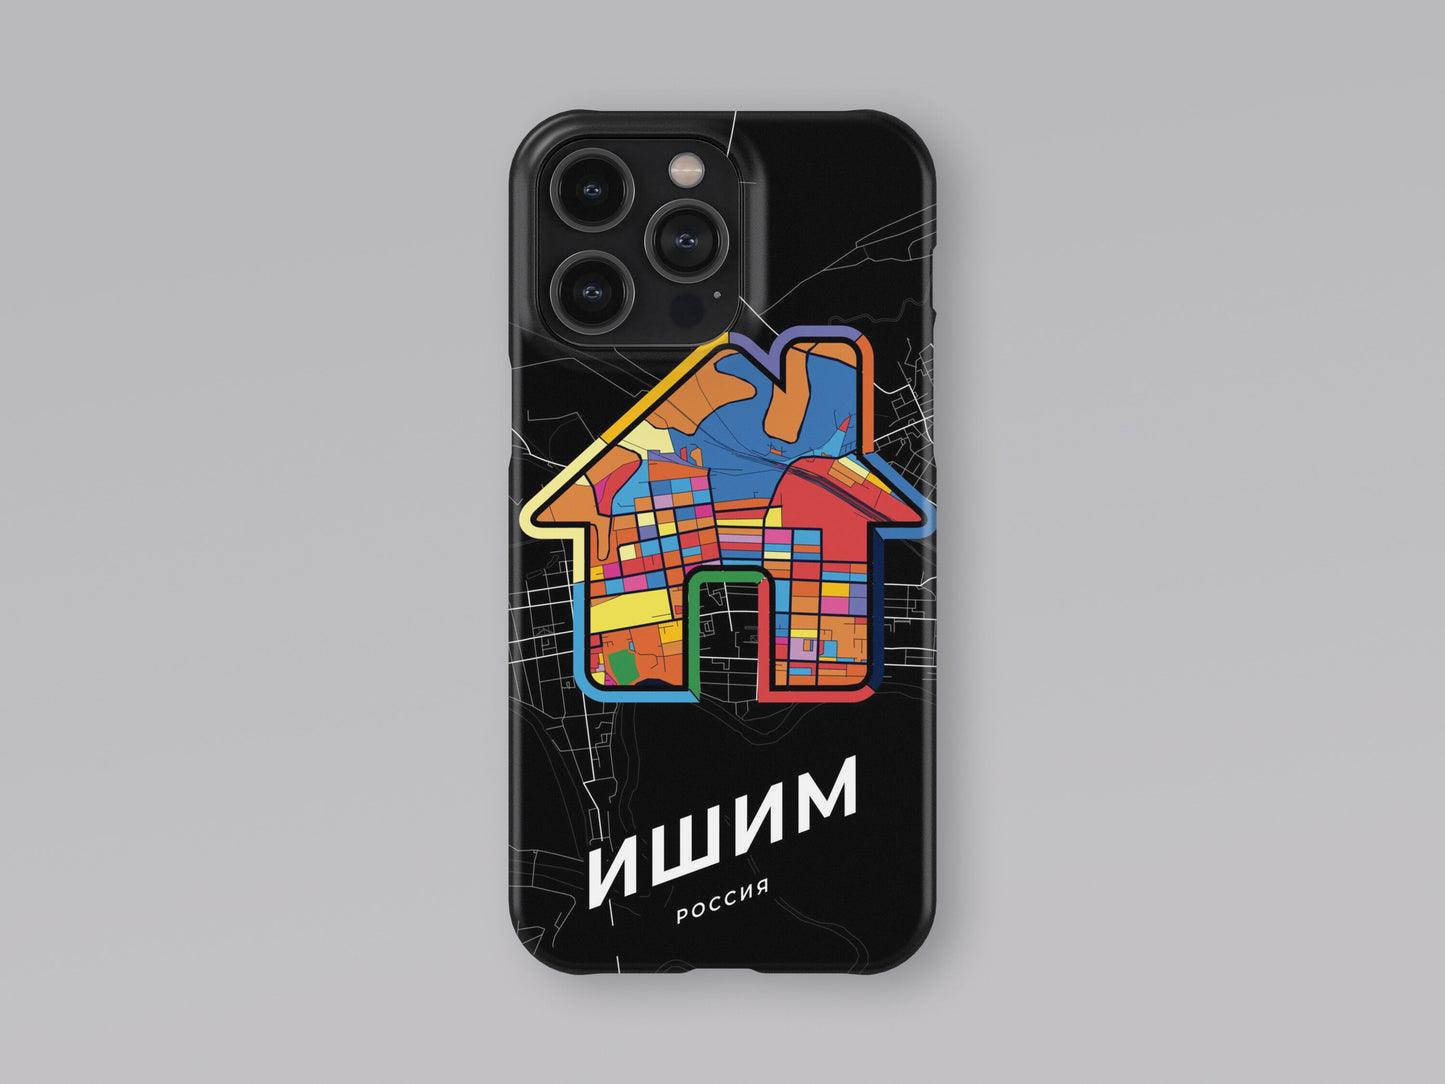 Ishim Russia slim phone case with colorful icon. Birthday, wedding or housewarming gift. Couple match cases. 3